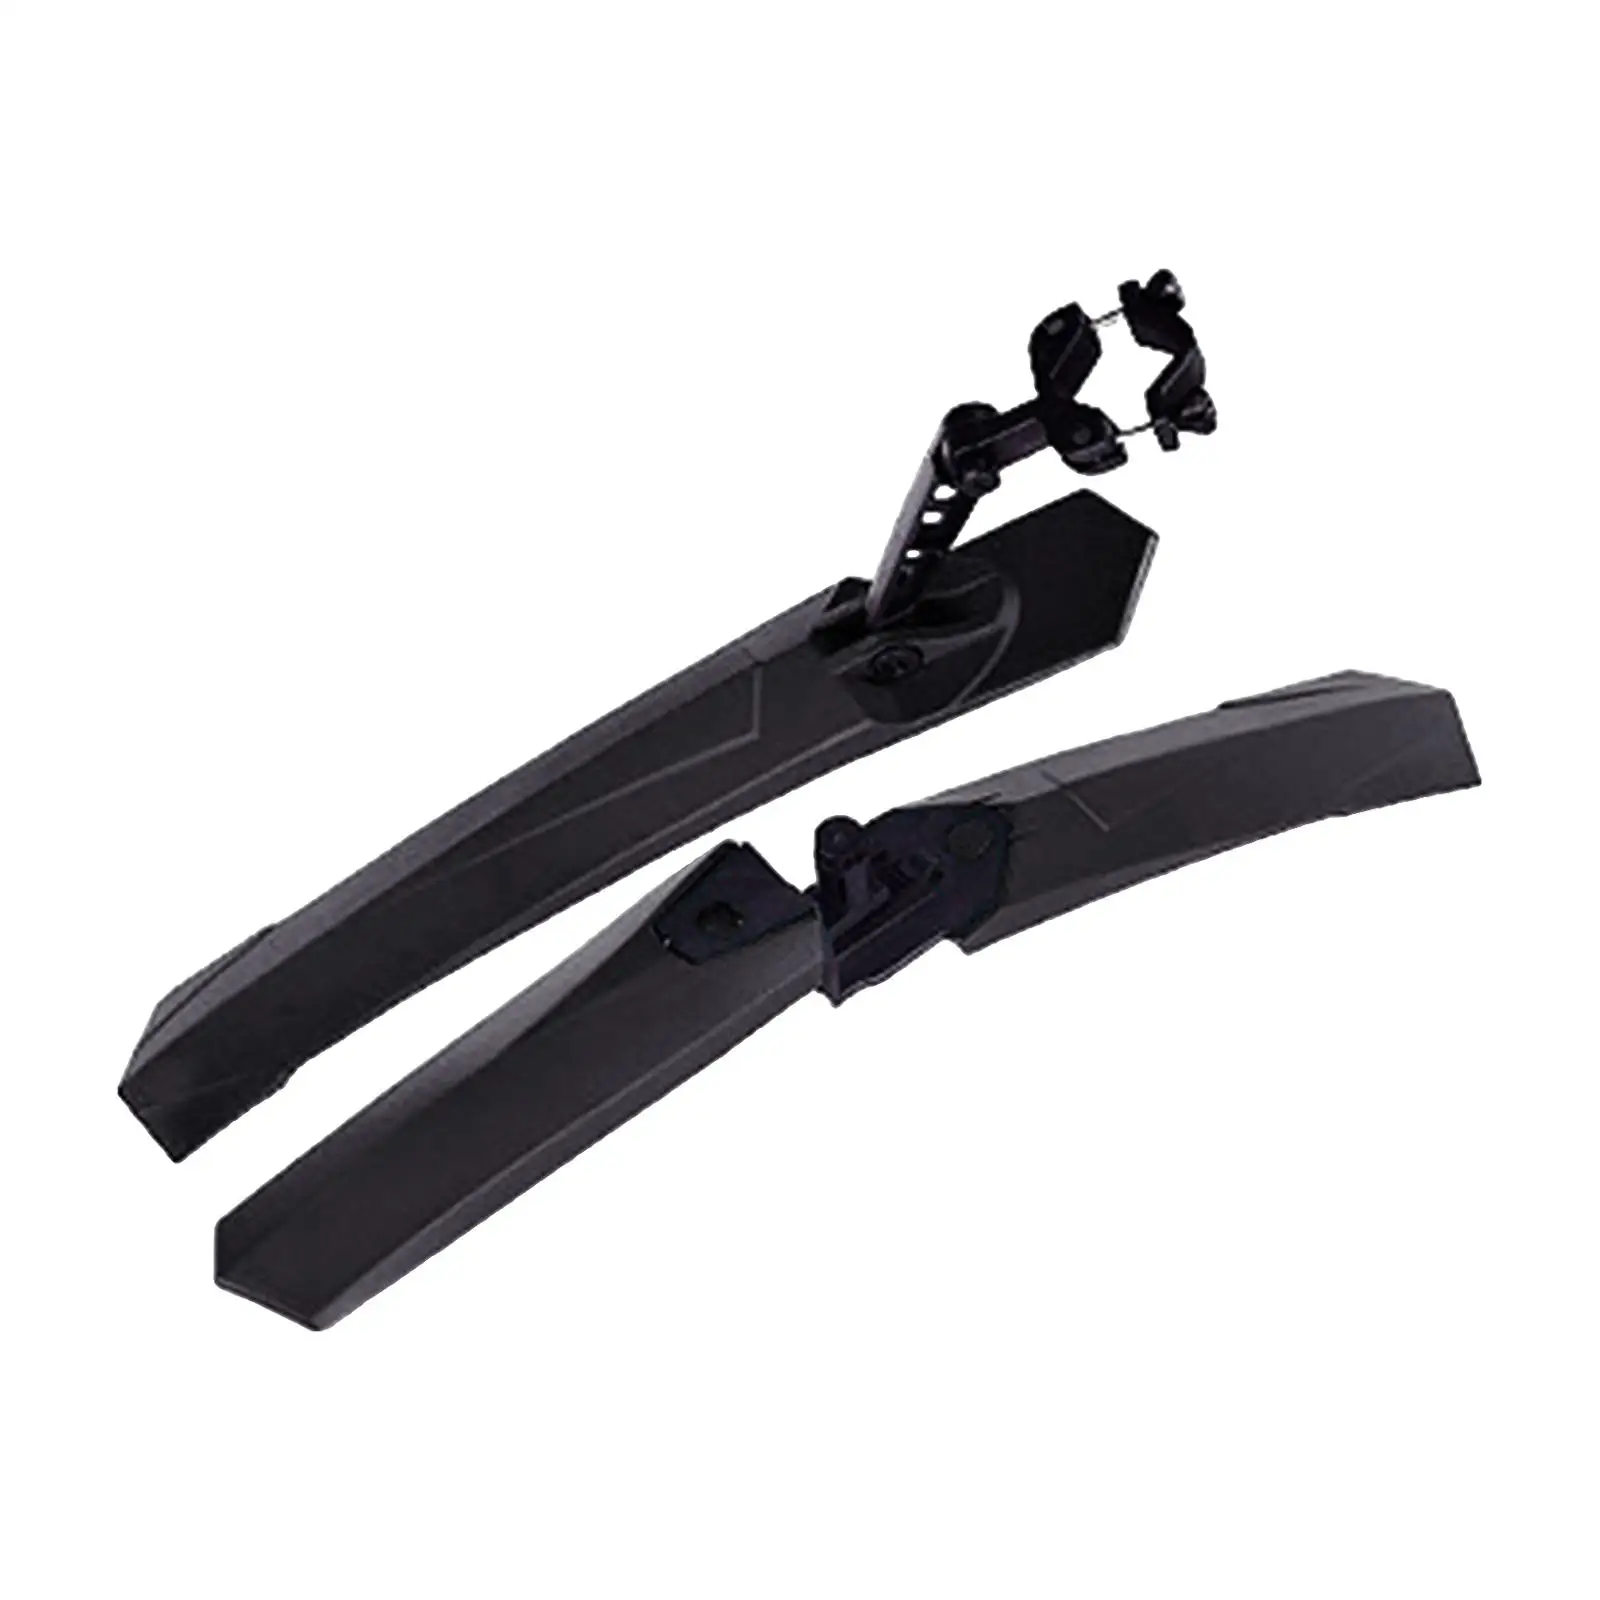 Bike Mudguard Front Rear Set Cycling Mud Guard Full Cover Mountain Bike Mud Guard for Traveling Riding Spare Parts Replaces